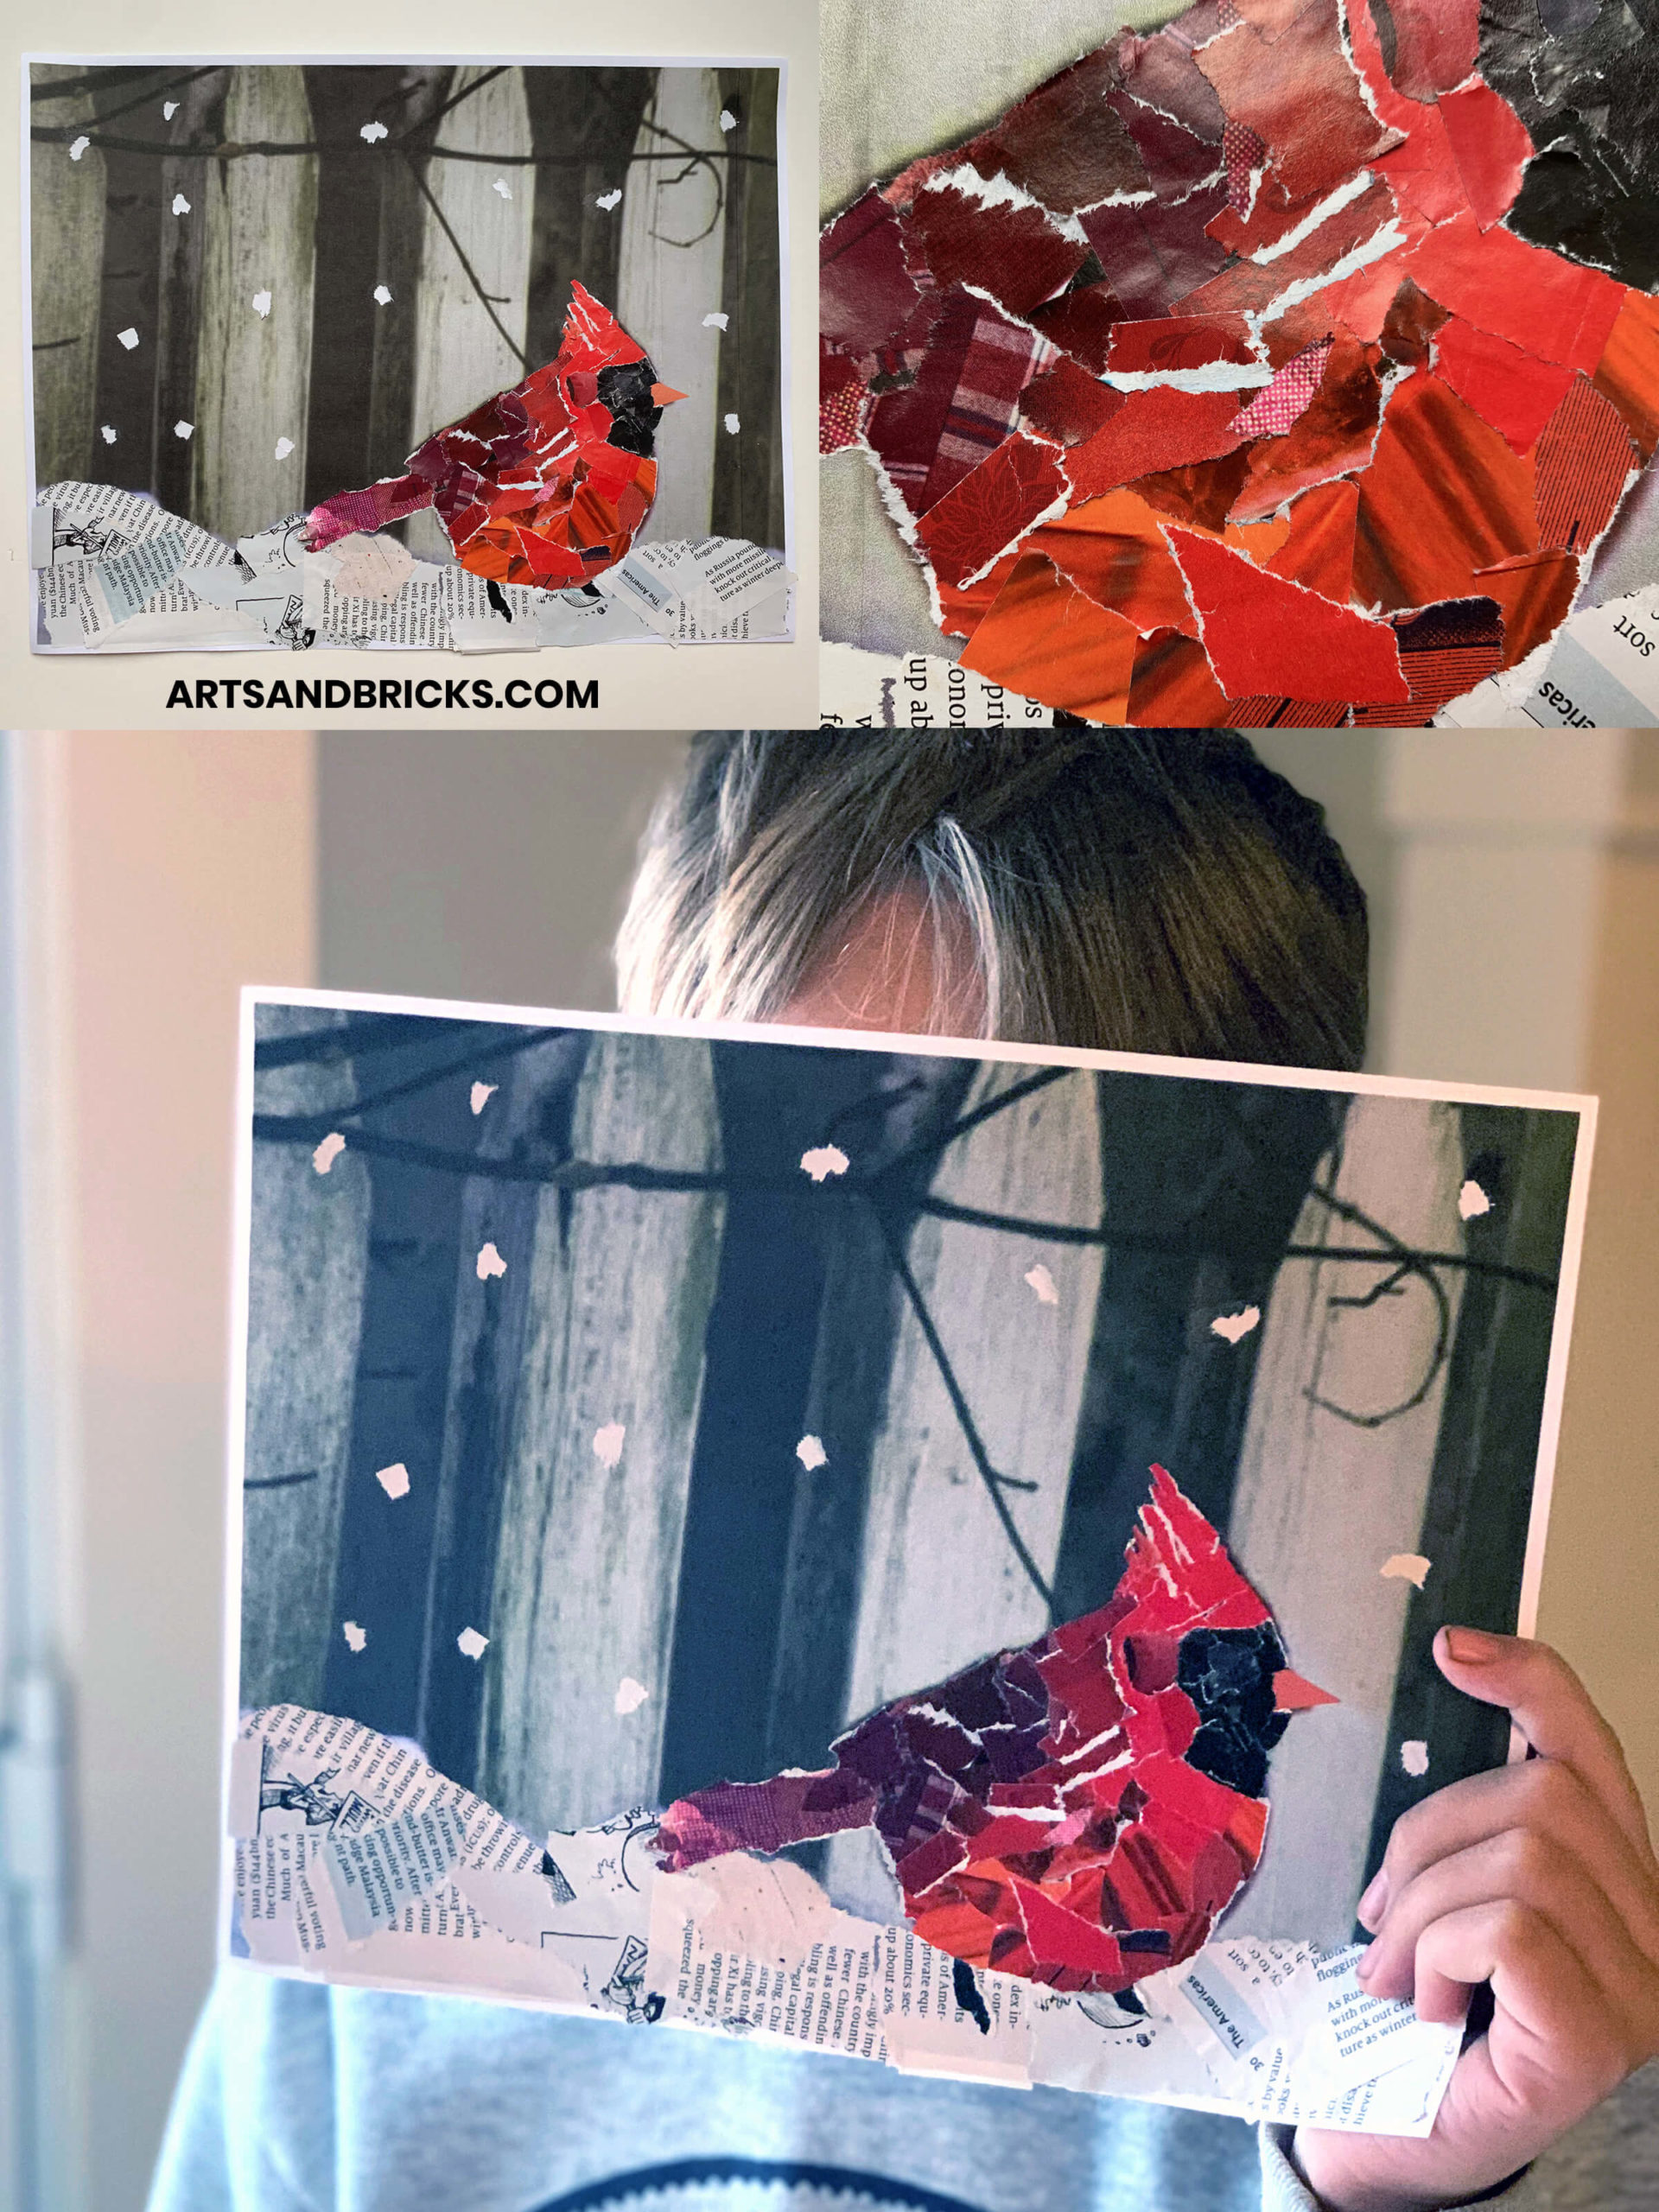 Using a combination of printed image and torn magazine paper to create a collage is a great way to encourage kids to make beautiful collage artwork. Materials are minimal and having a picture to use as a guide helps children not get stuck on the shape or design of their animal or other focal point. Get inspired on techniques for other children's collage on our kids activity blog: artsandbricks.com.